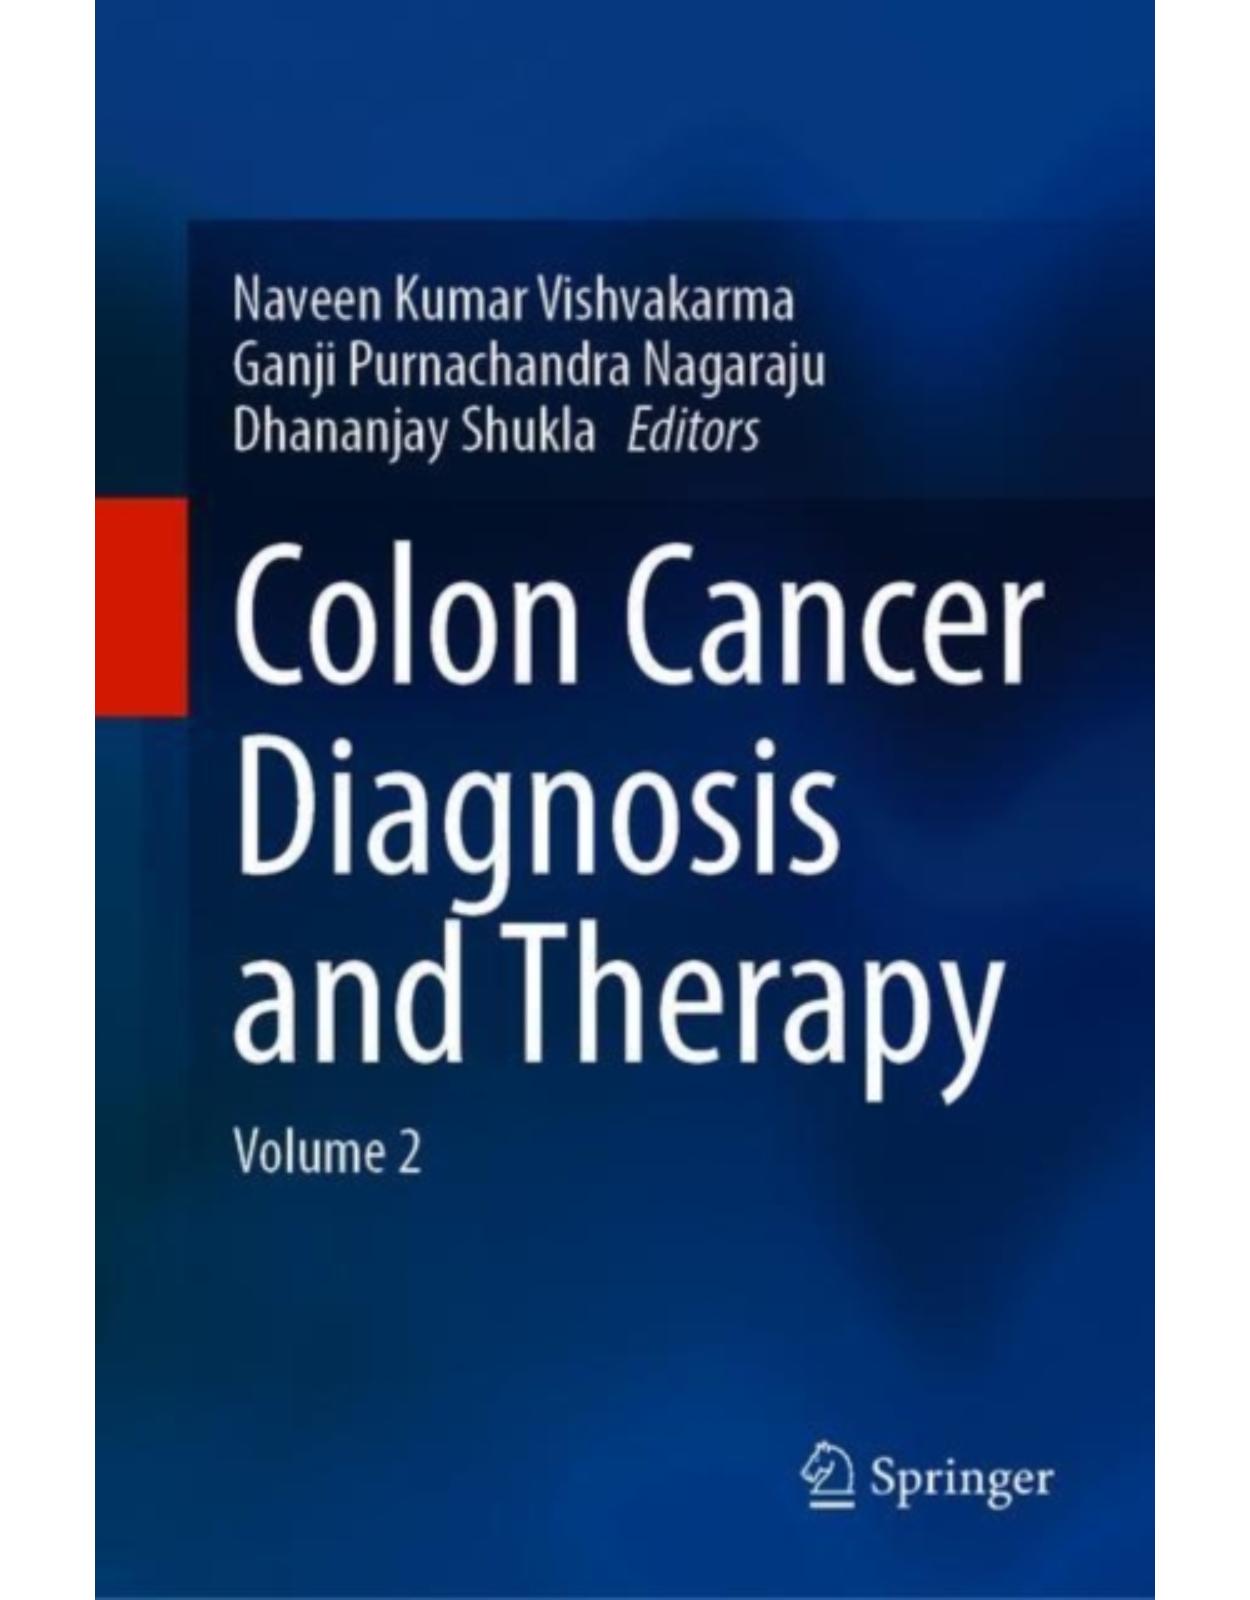 Colon Cancer Diagnosis and Therapy Volume 2